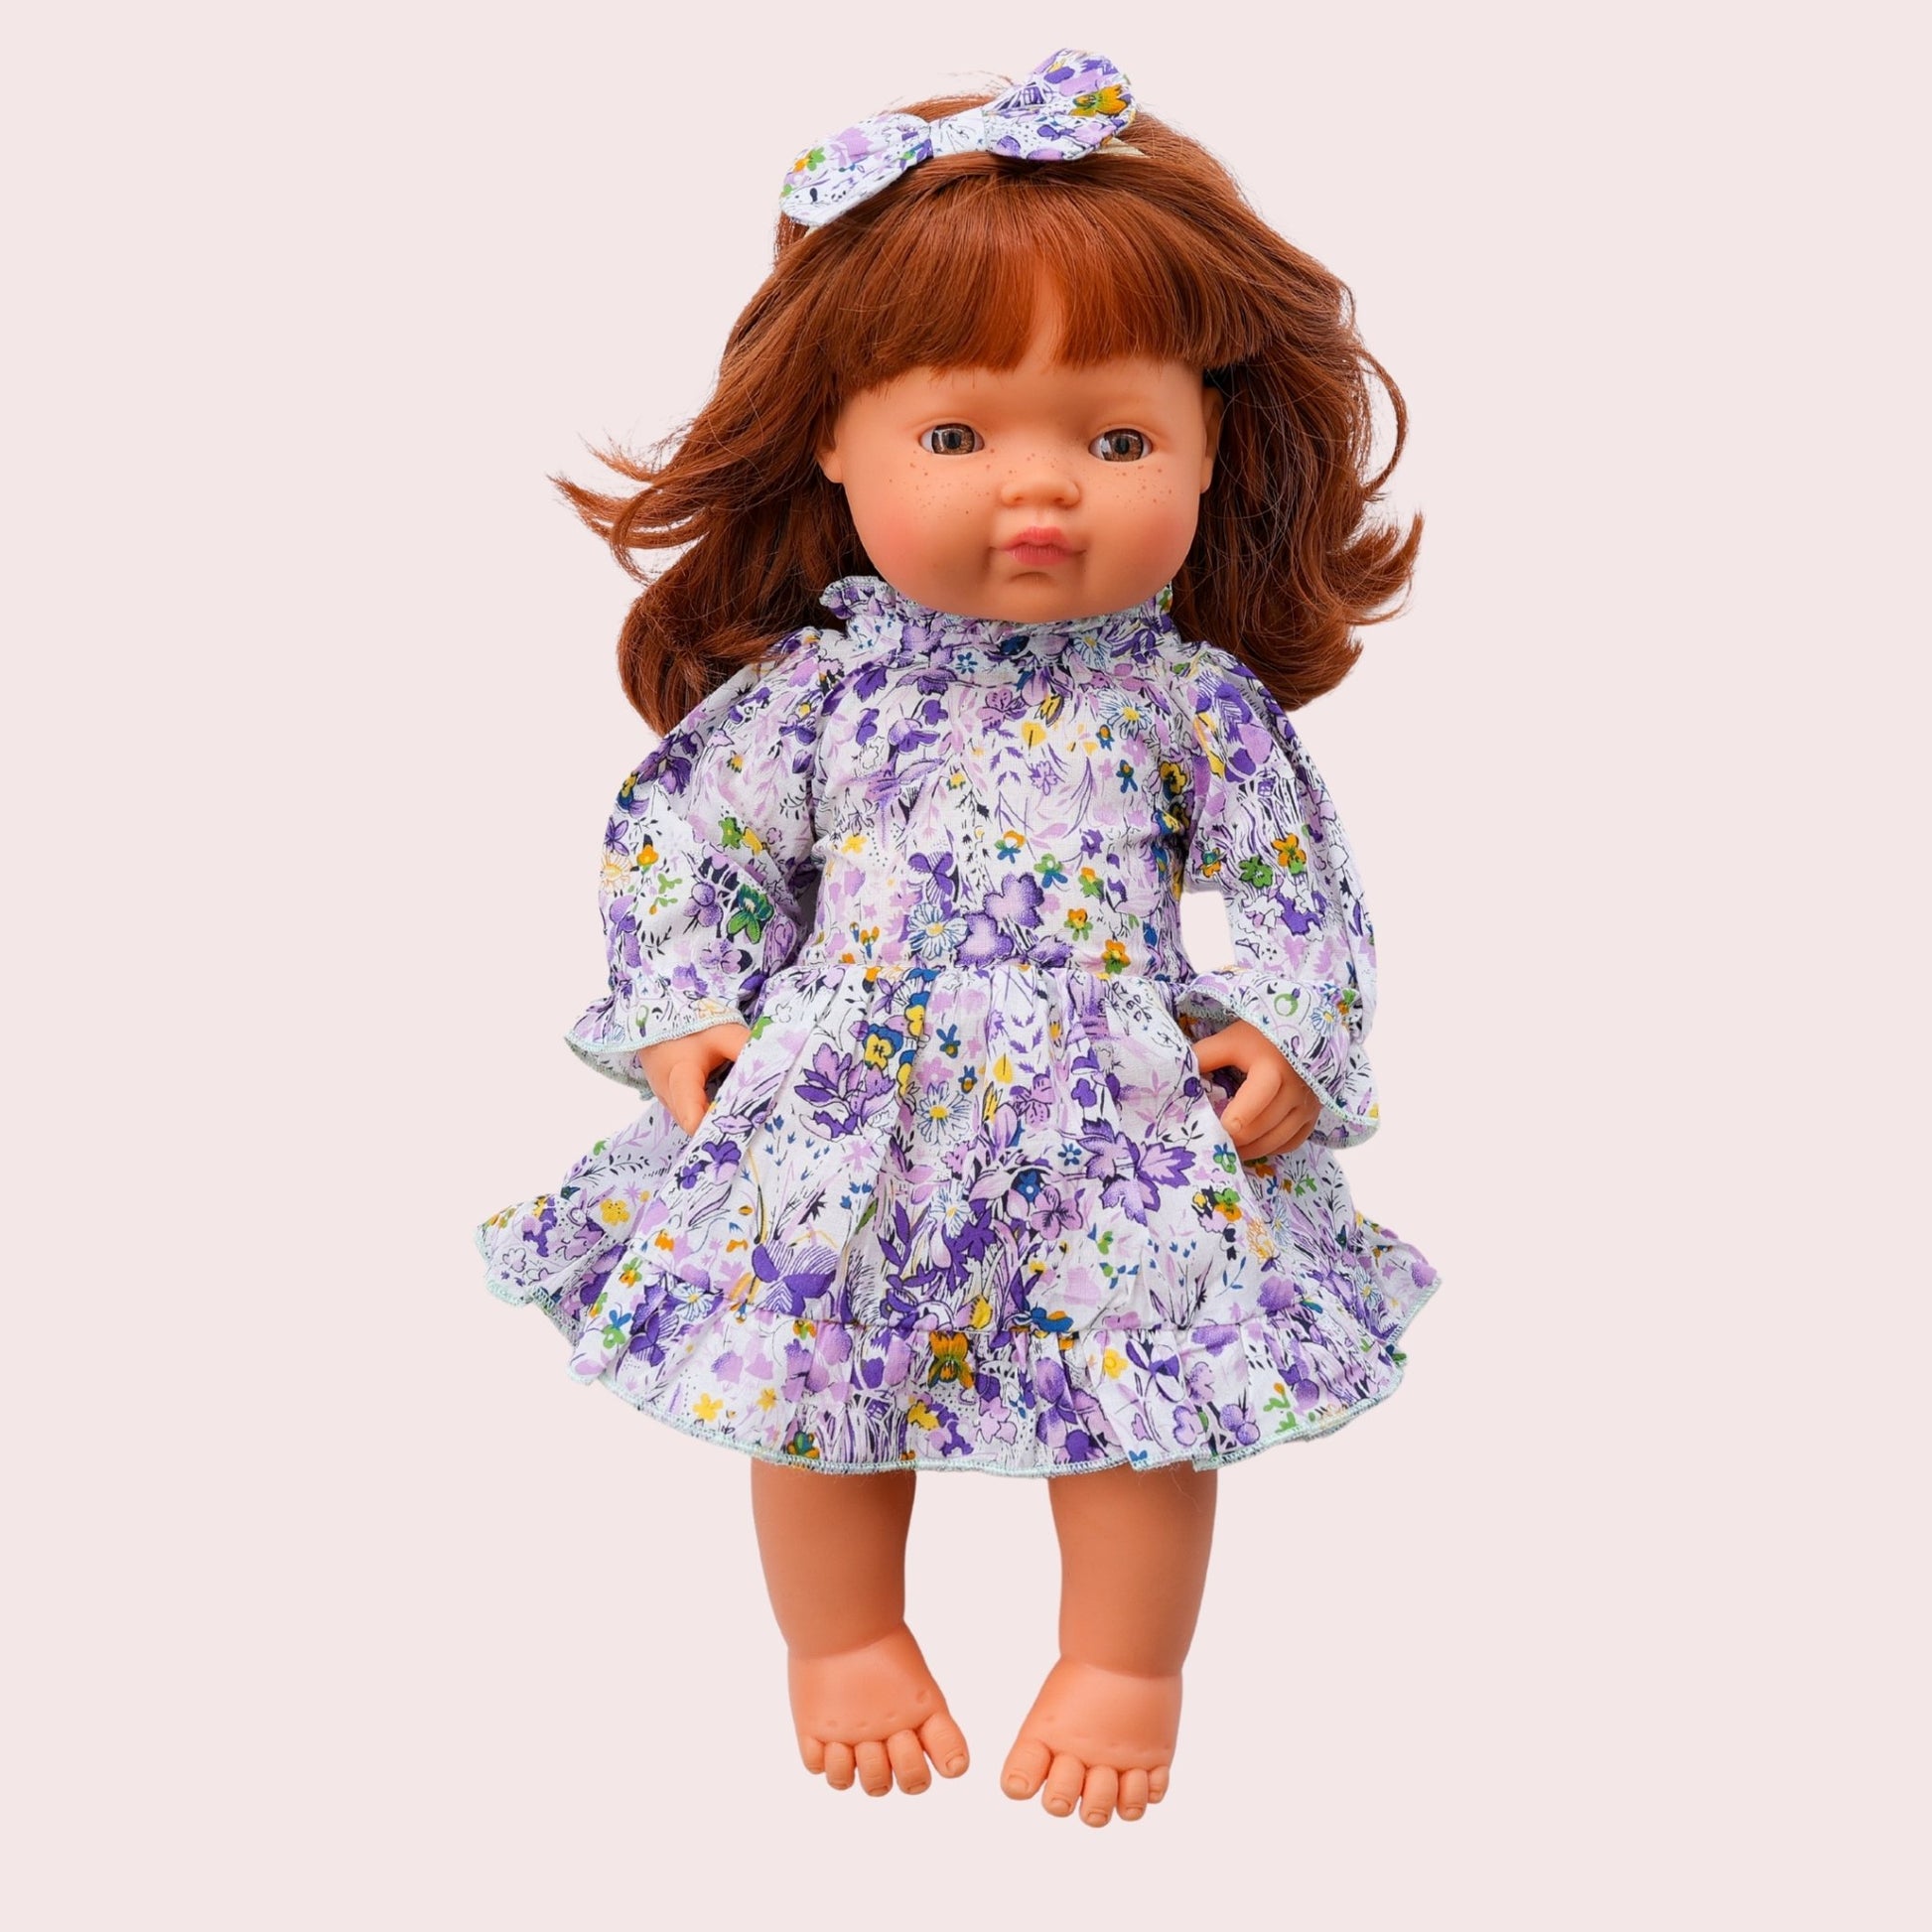 SIA FRILLY DRESS FOR MINILAND DOLL - Toots Kids